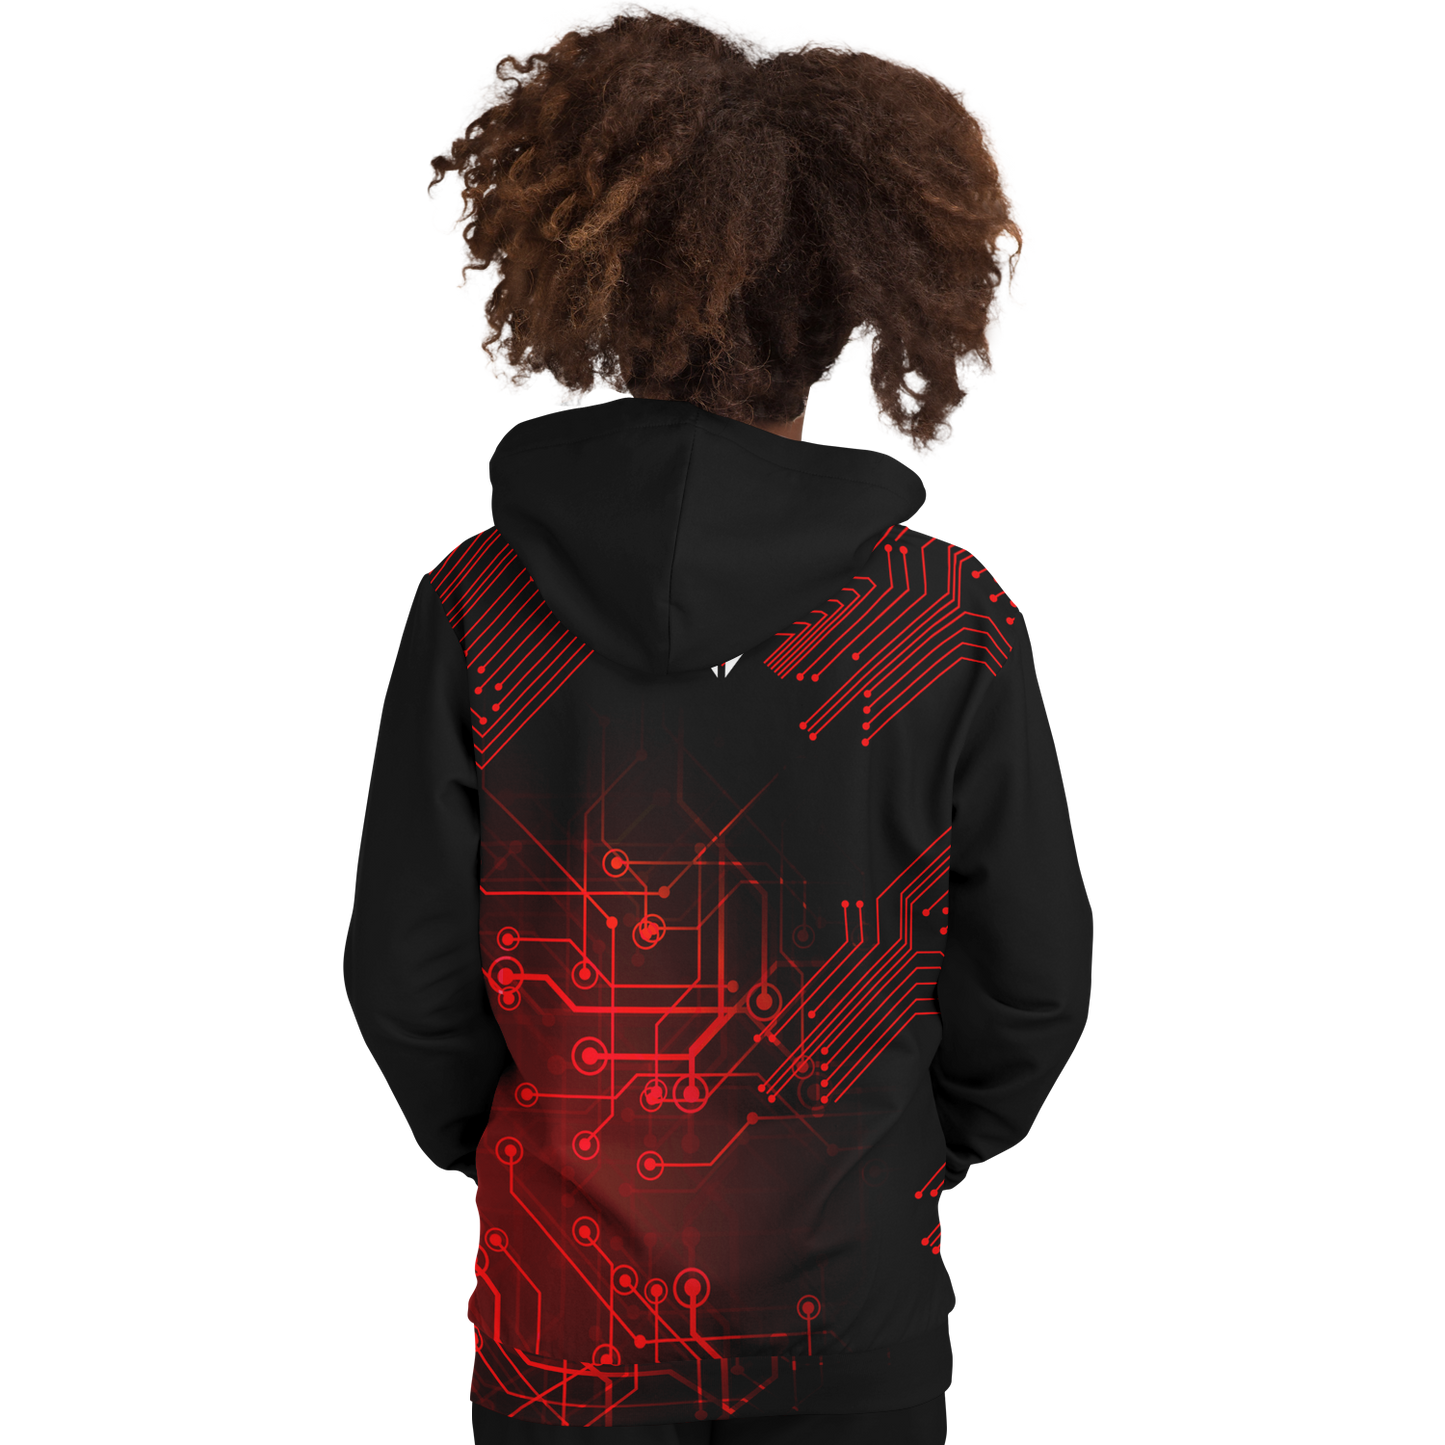 AlphaBroVR Youth All Over Print Fashion Hoodie